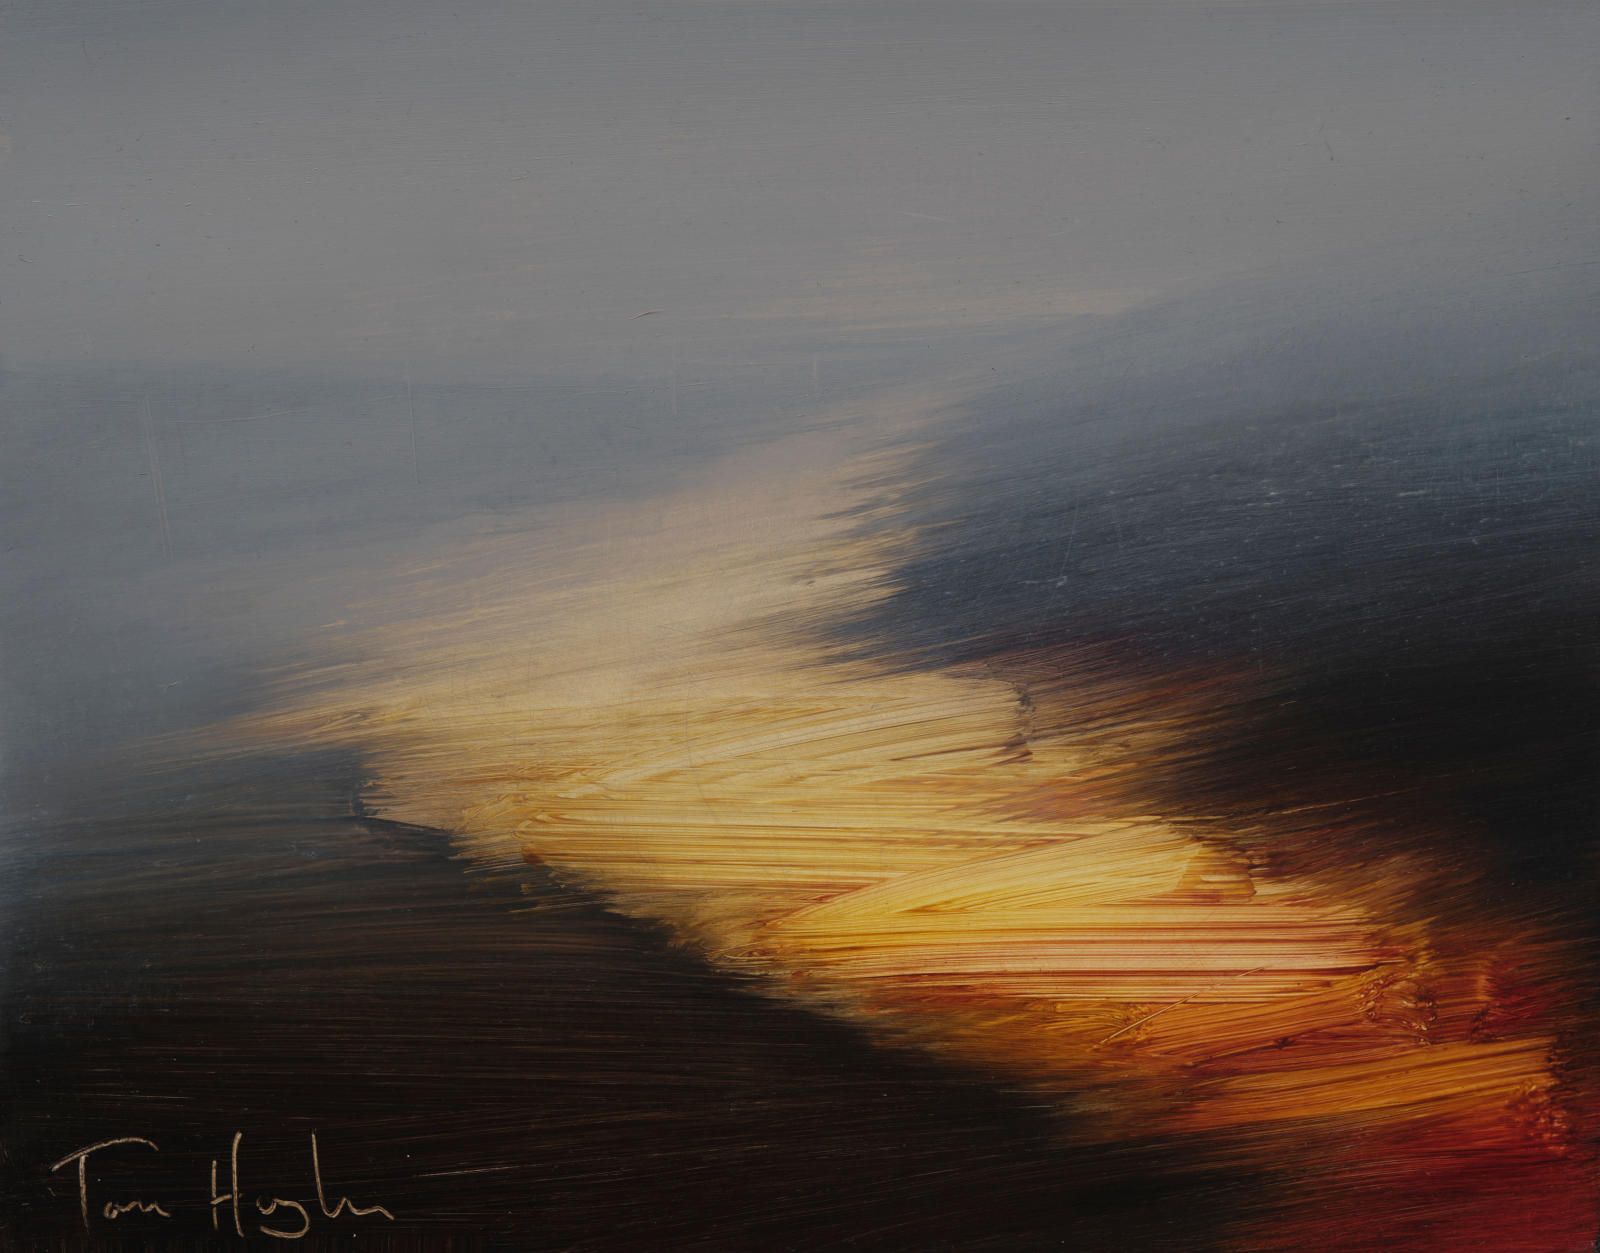 Fire Road by Tom Hughes